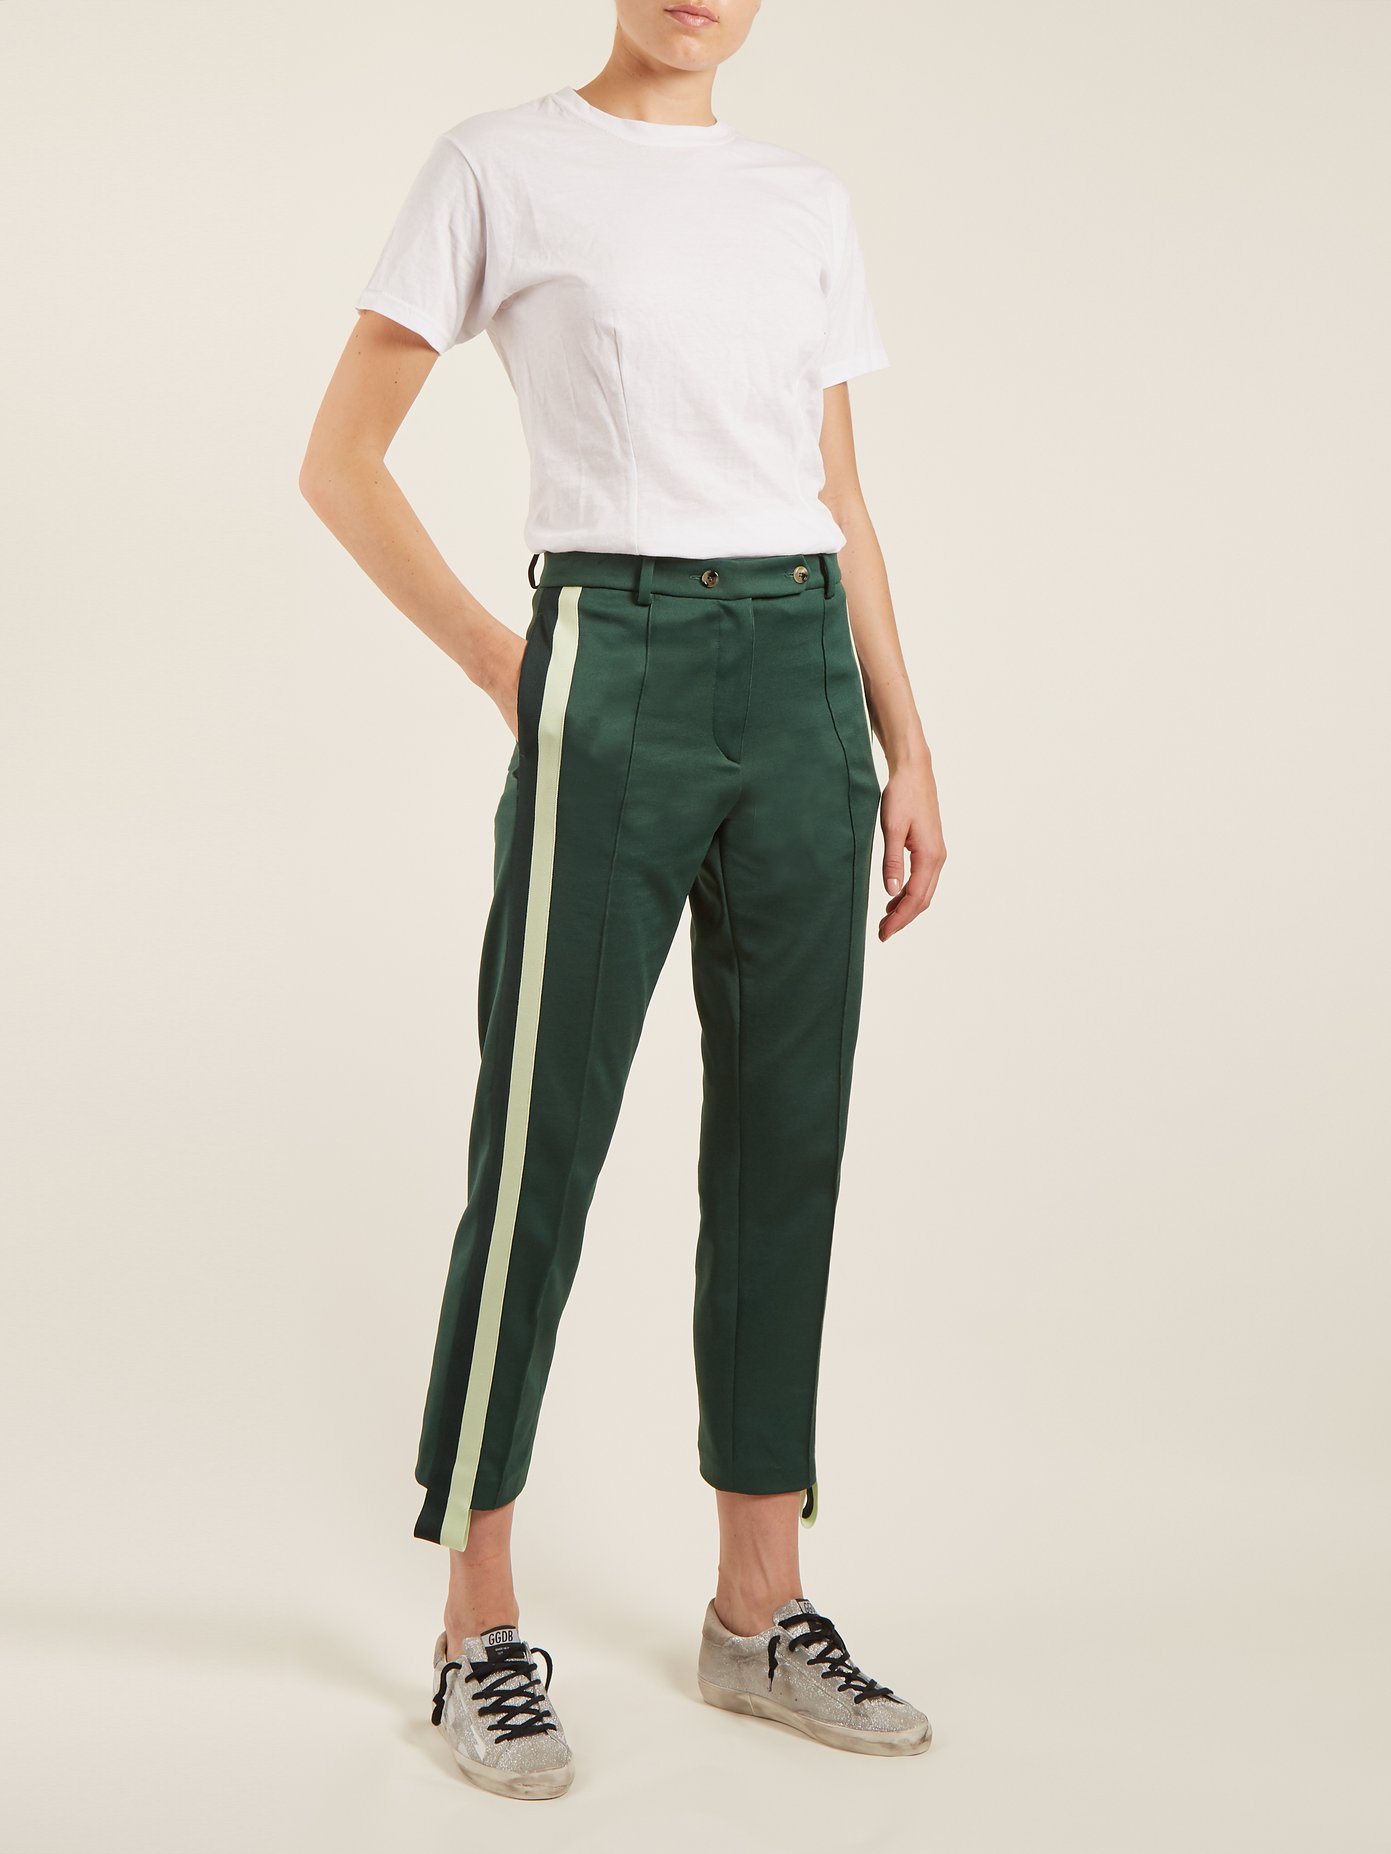 https://assetsprx.matchesfashion.com/img/product/1391/outfit_1202042_1.jpg